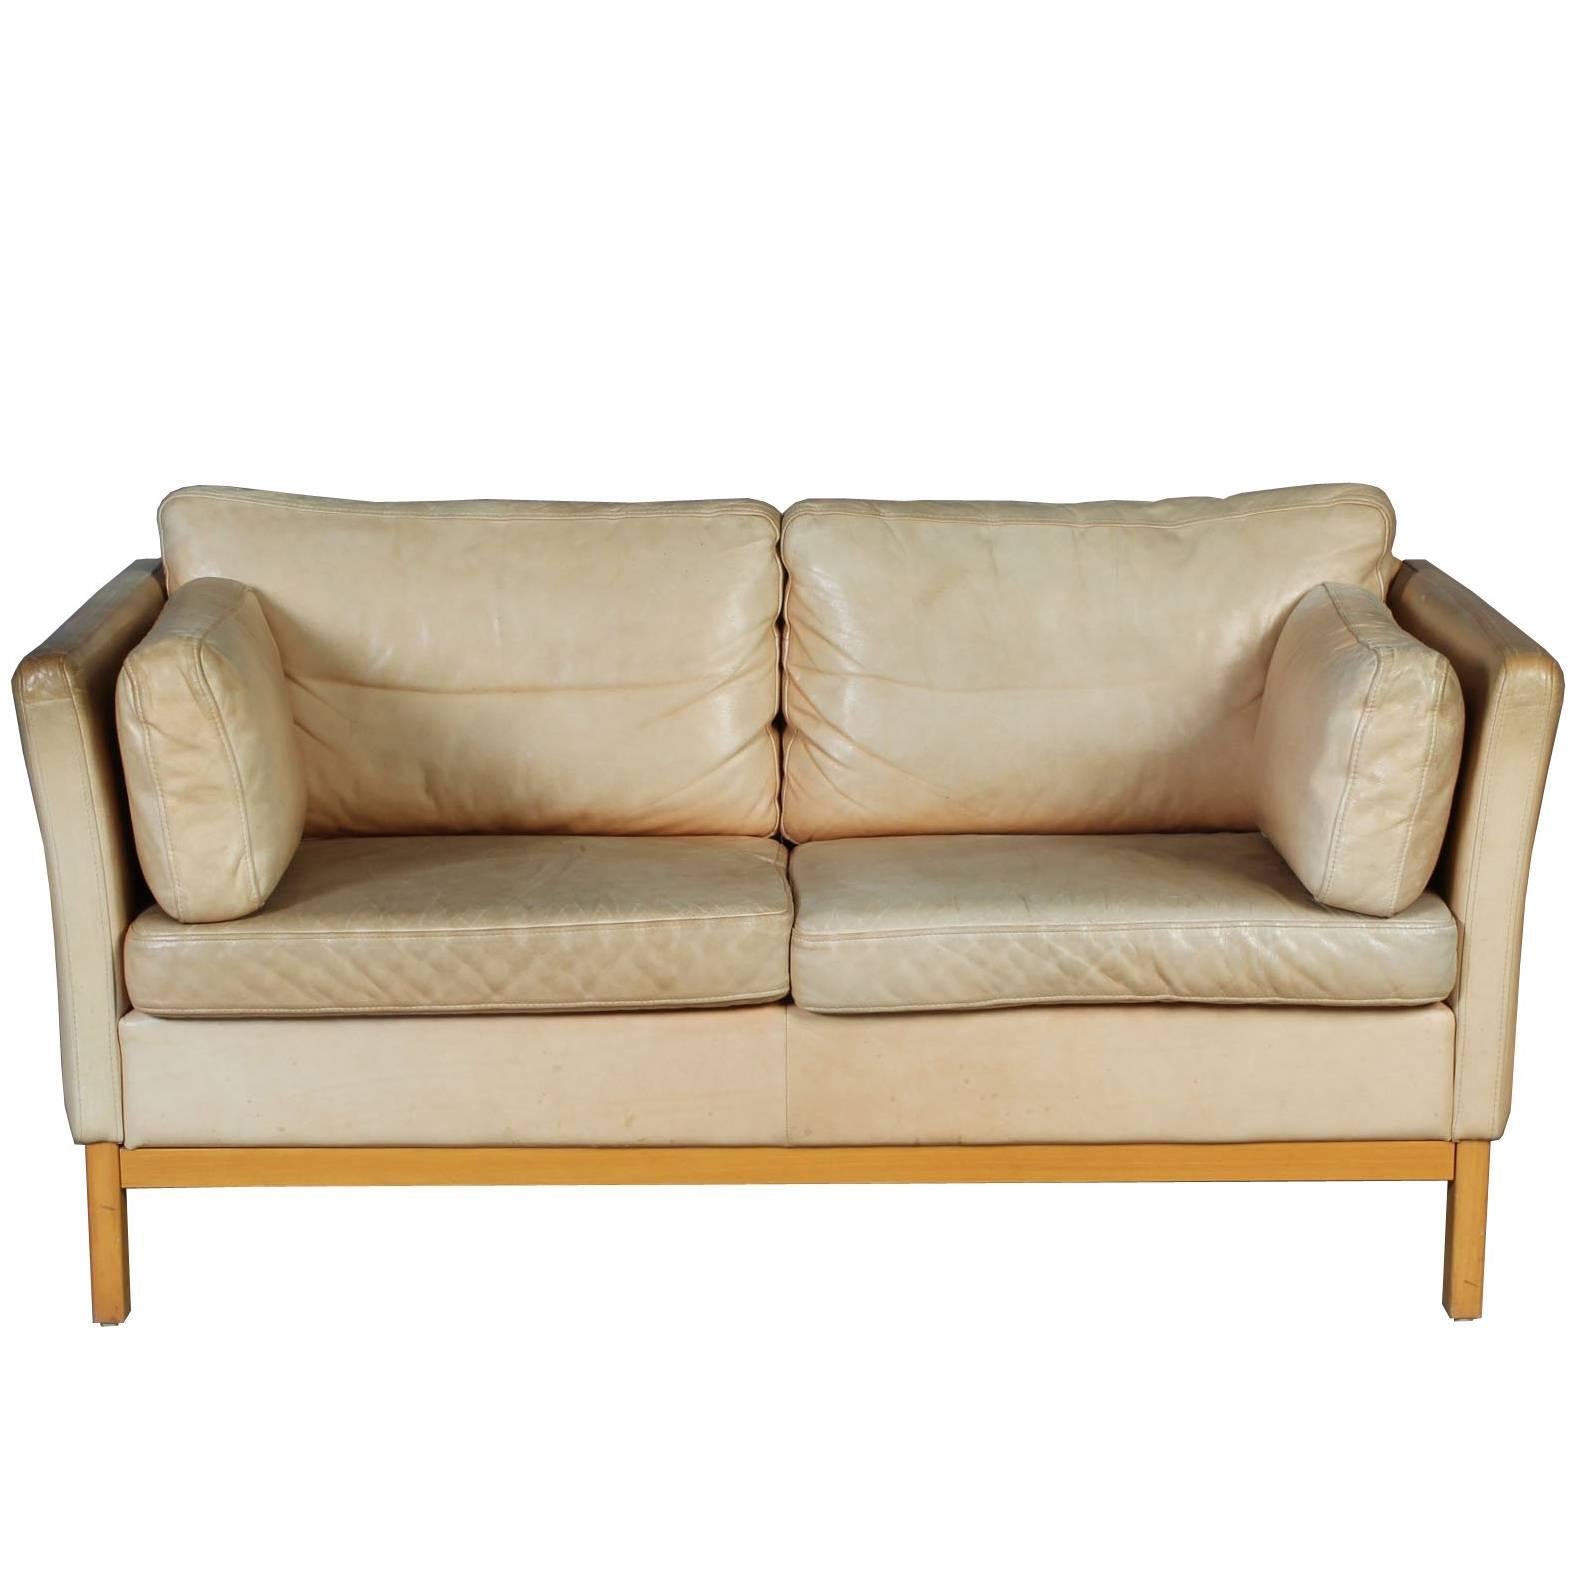 Mid-Century Modern Two-Seat Sofa in Leather